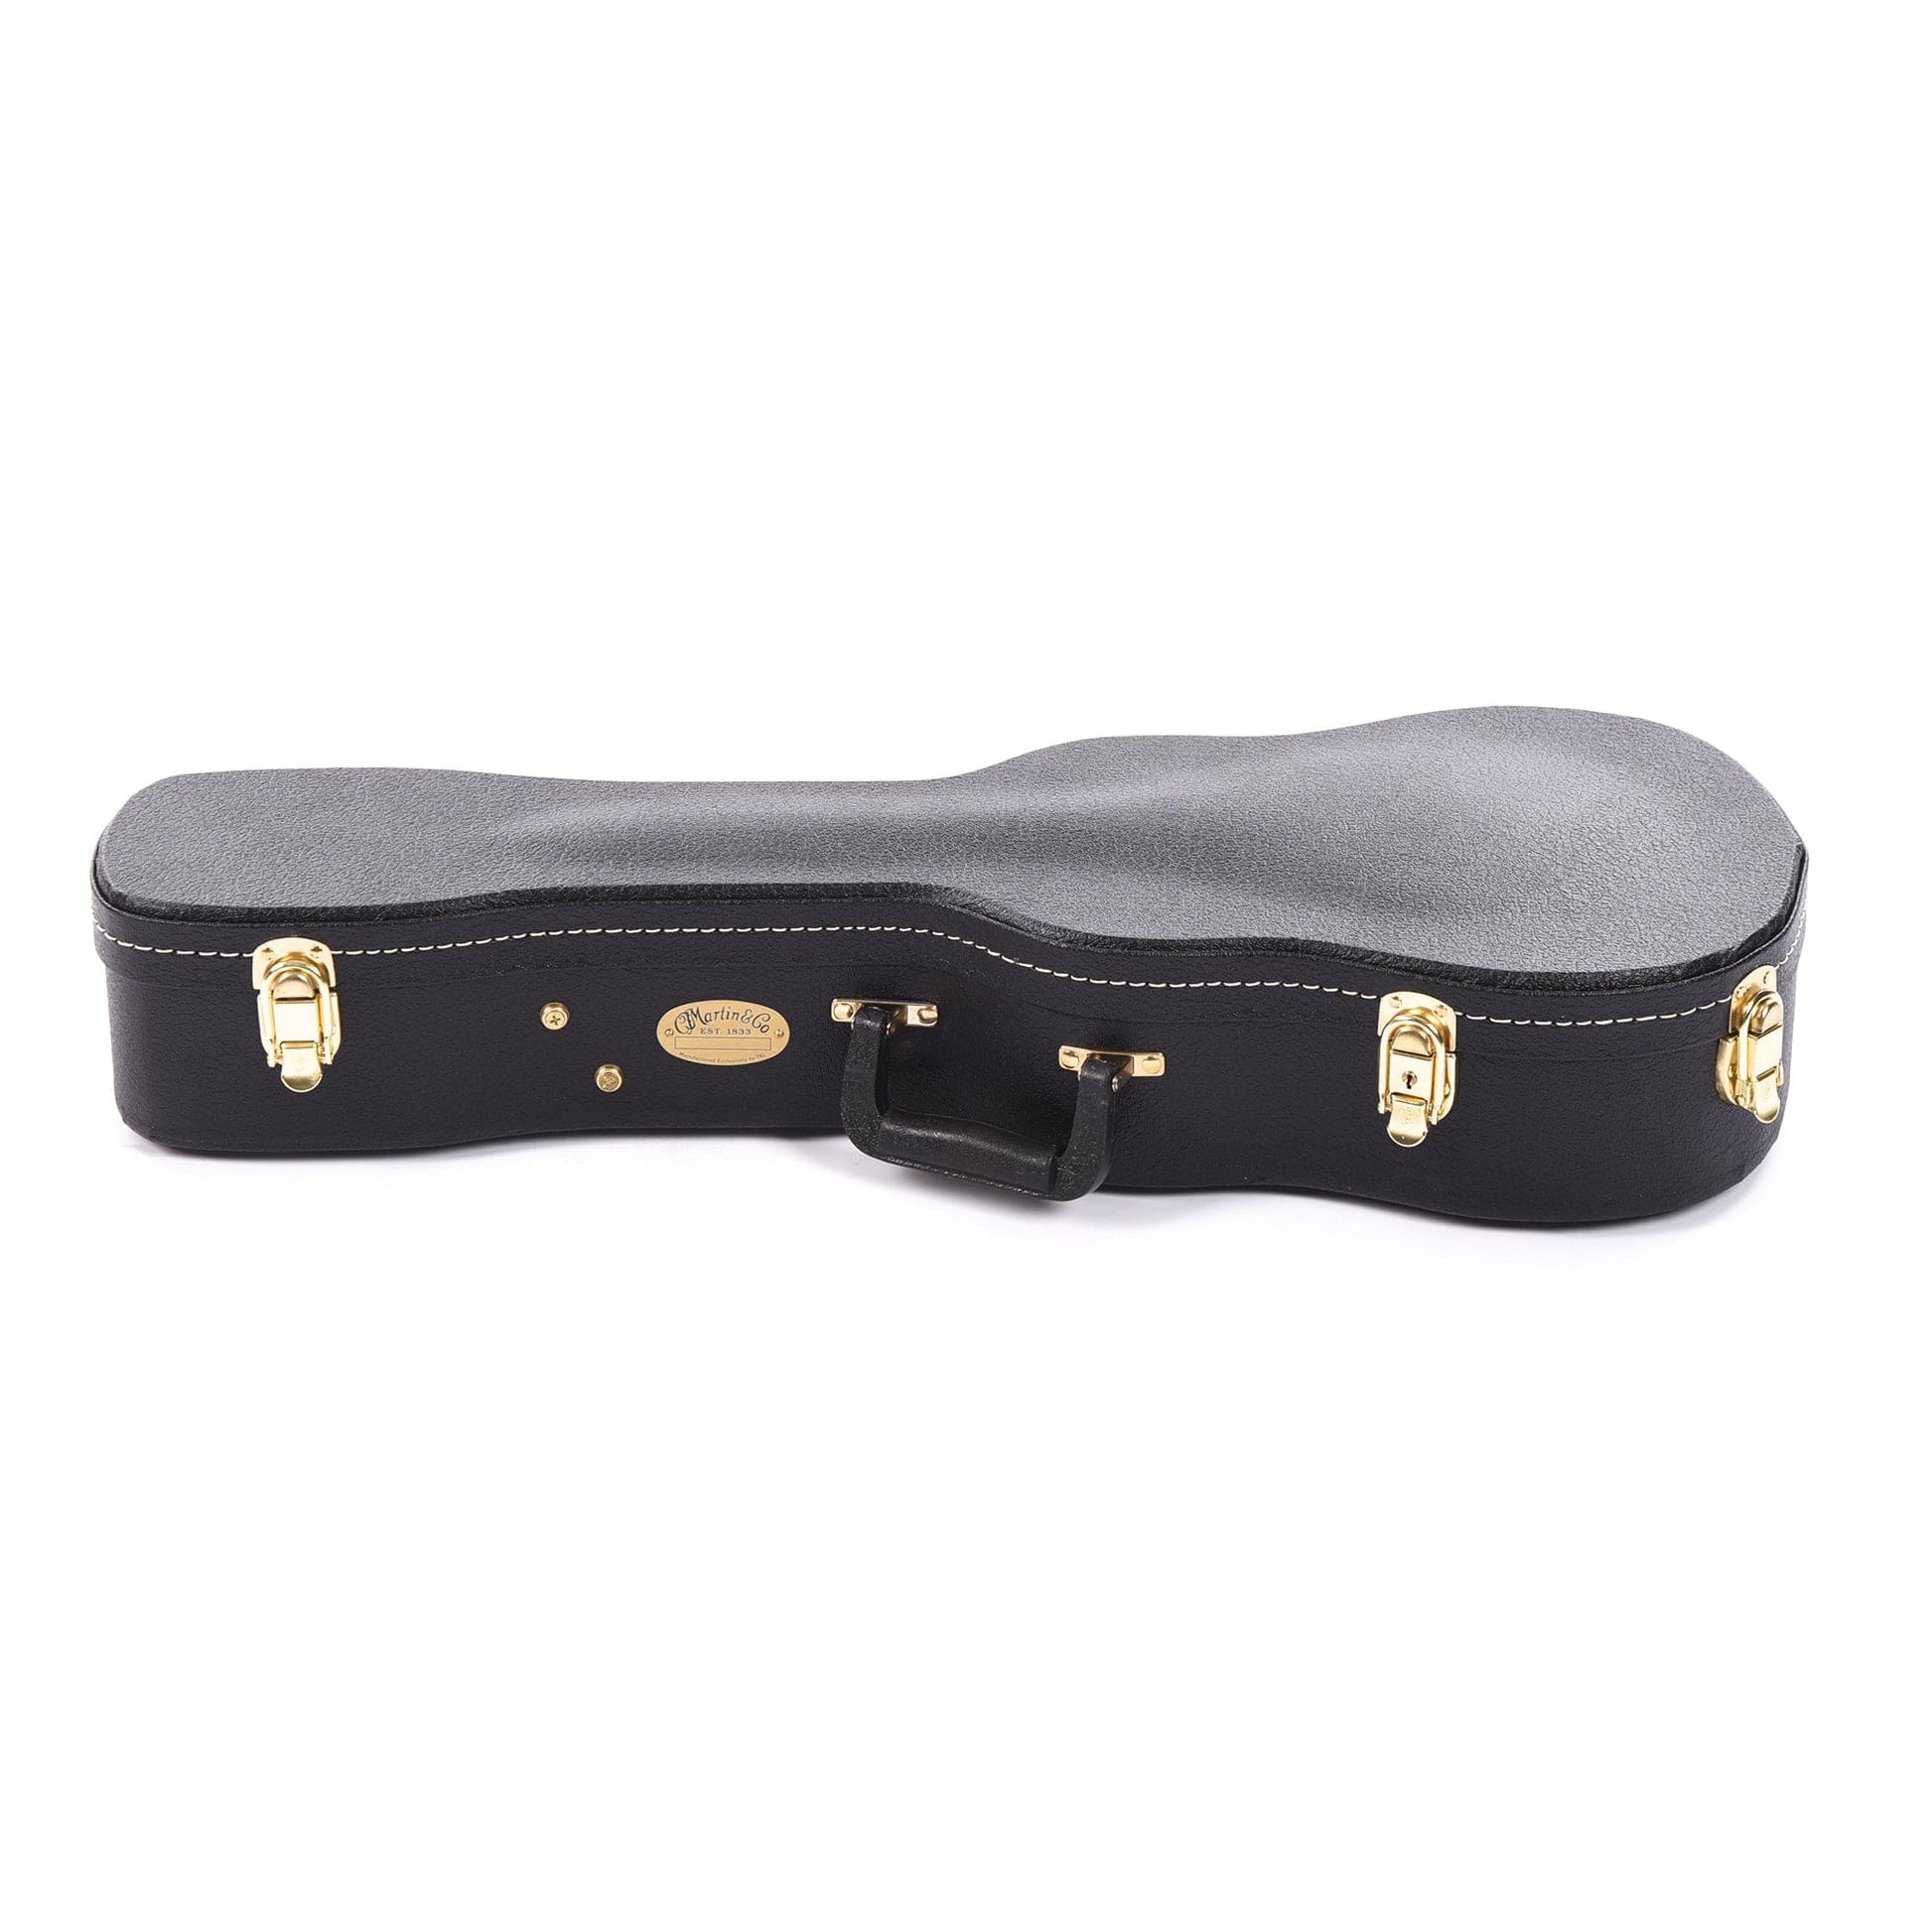 Martin 12C0071 Tenor Ukulele Hardshell Case Black Accessories / Cases and Gig Bags / Guitar Cases